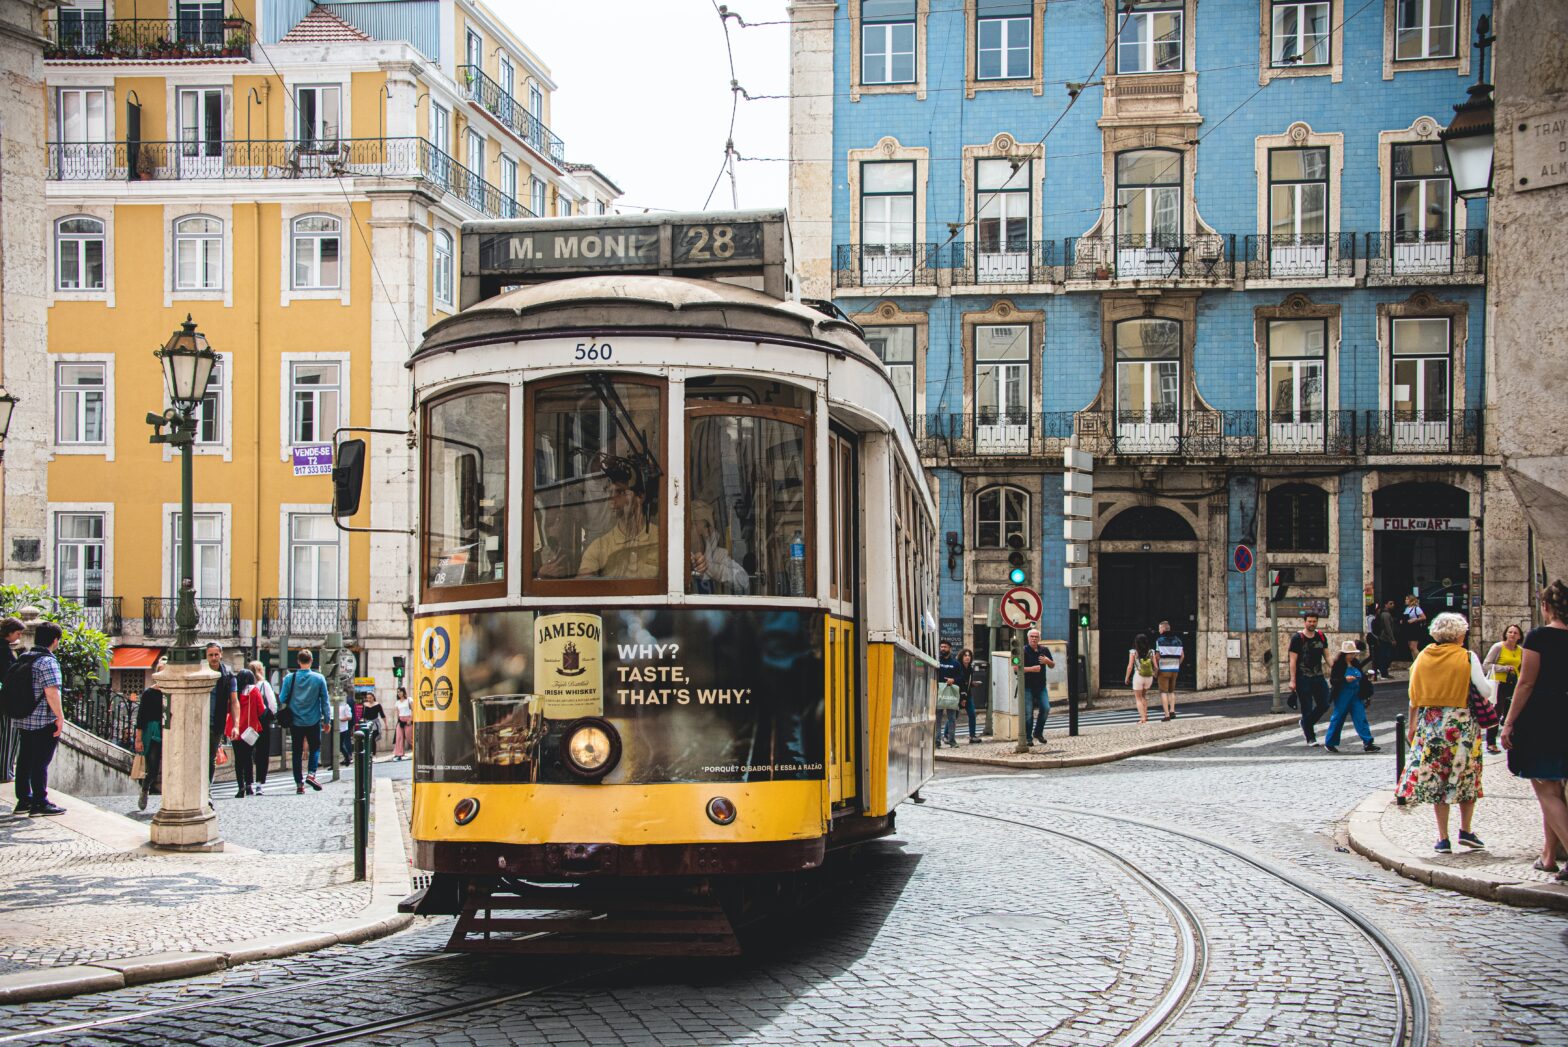 If You Want To Retire In Europe, One Company Suggests Portugal